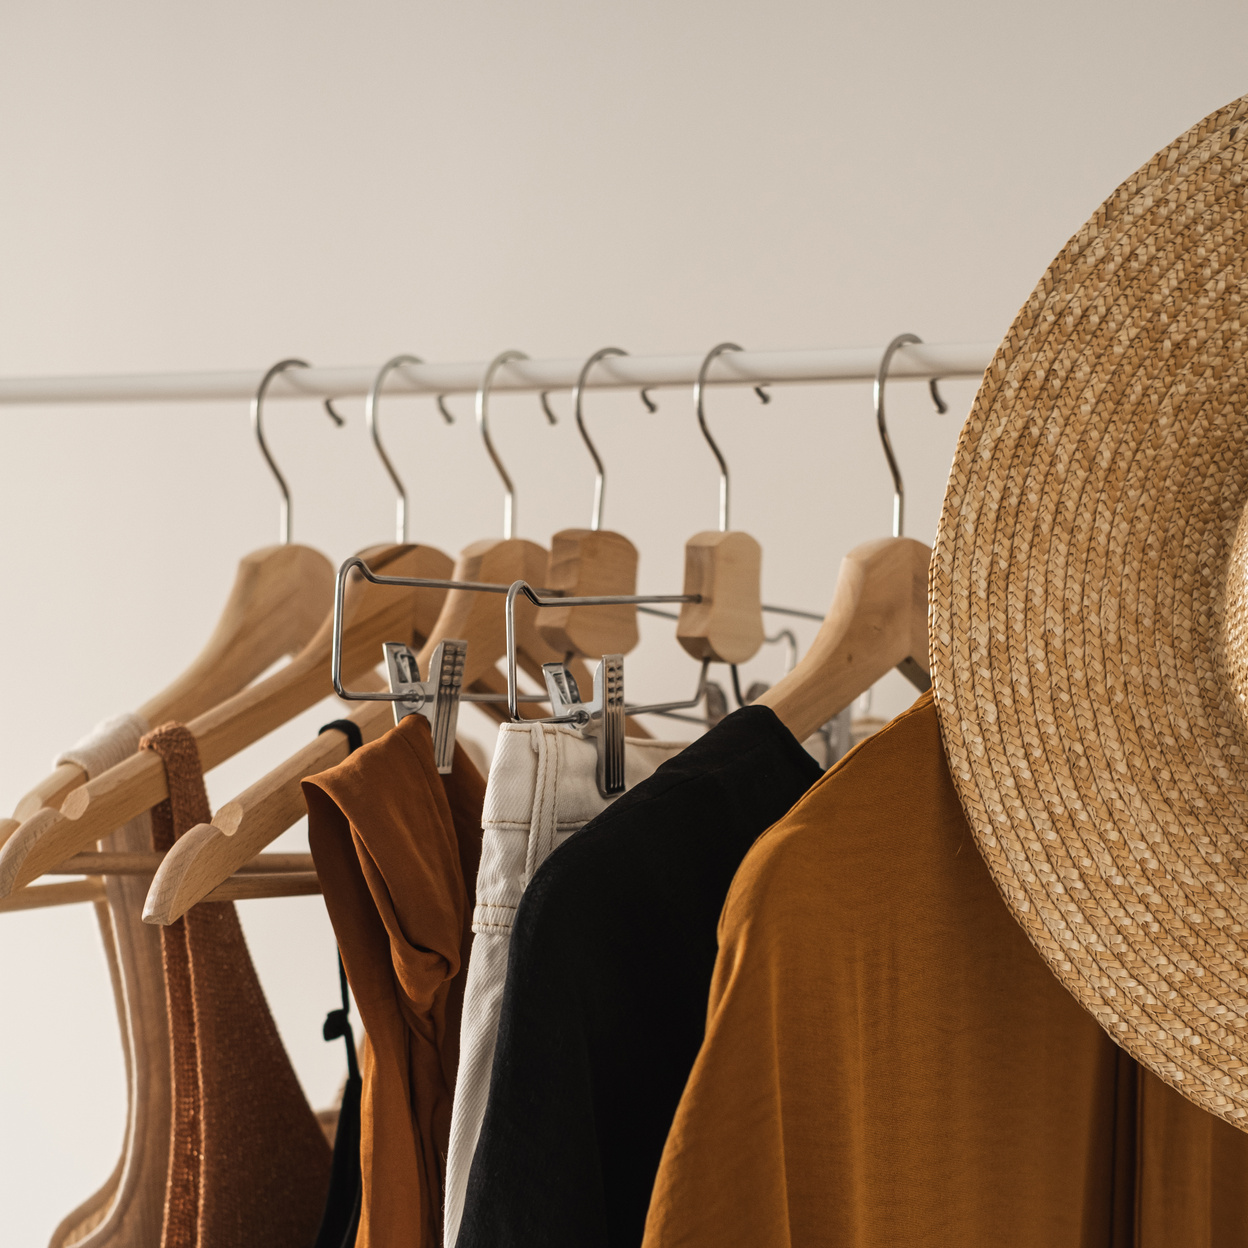 Neutral Clothes on Clothing Rack with a Hat